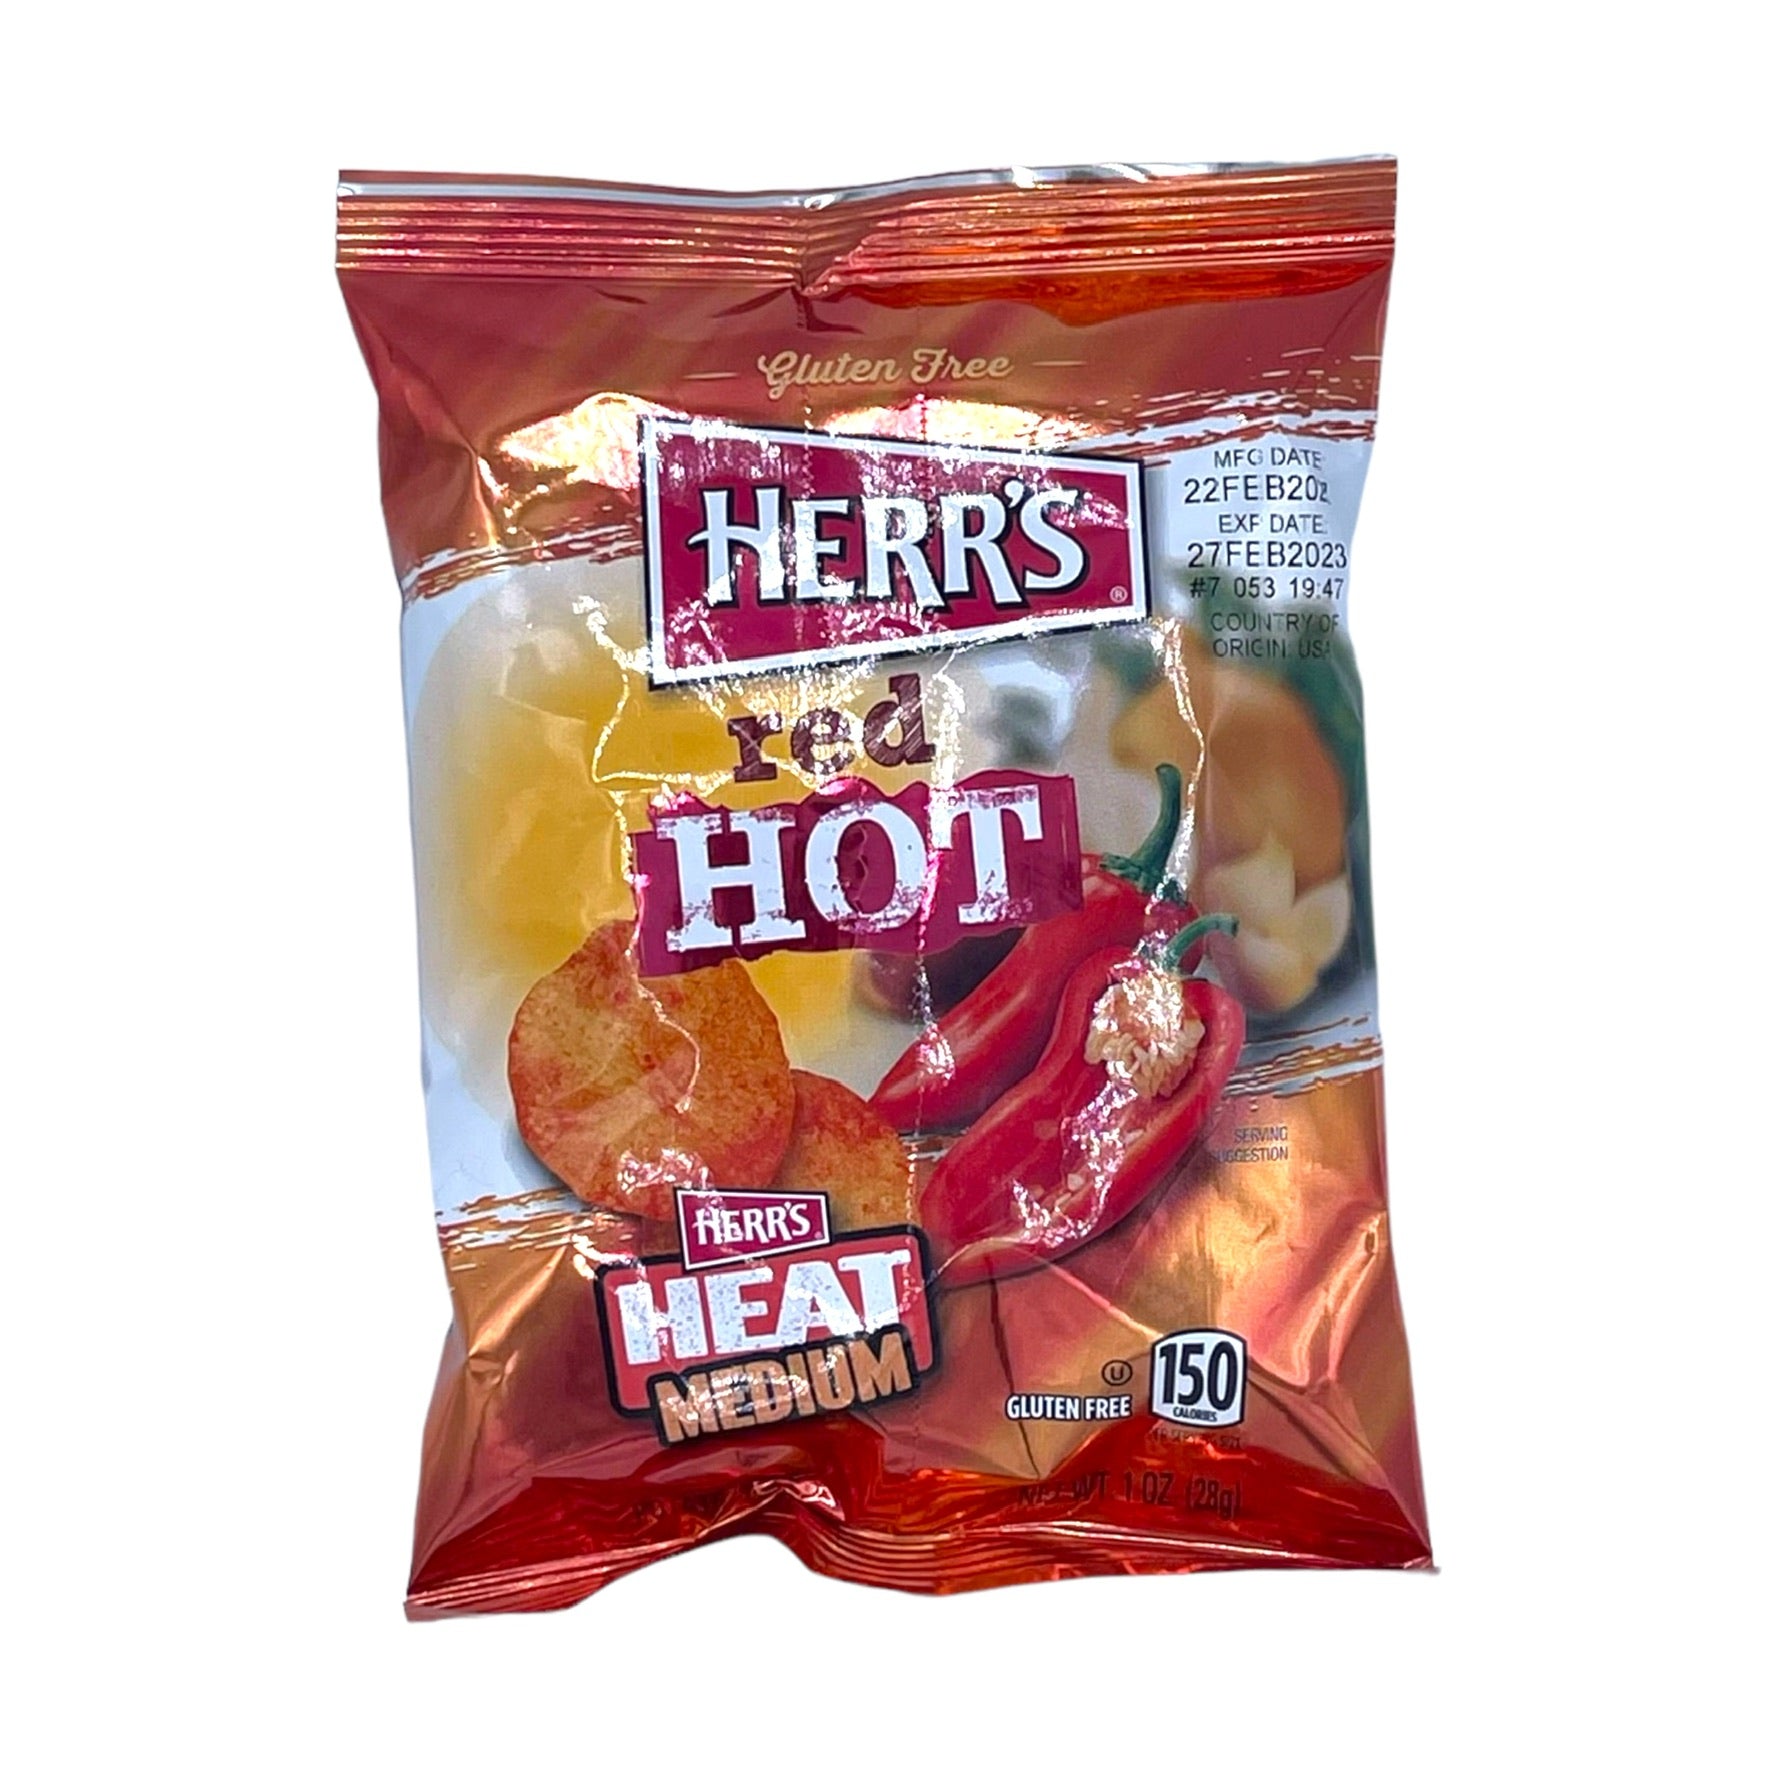 Herrs Red Hot